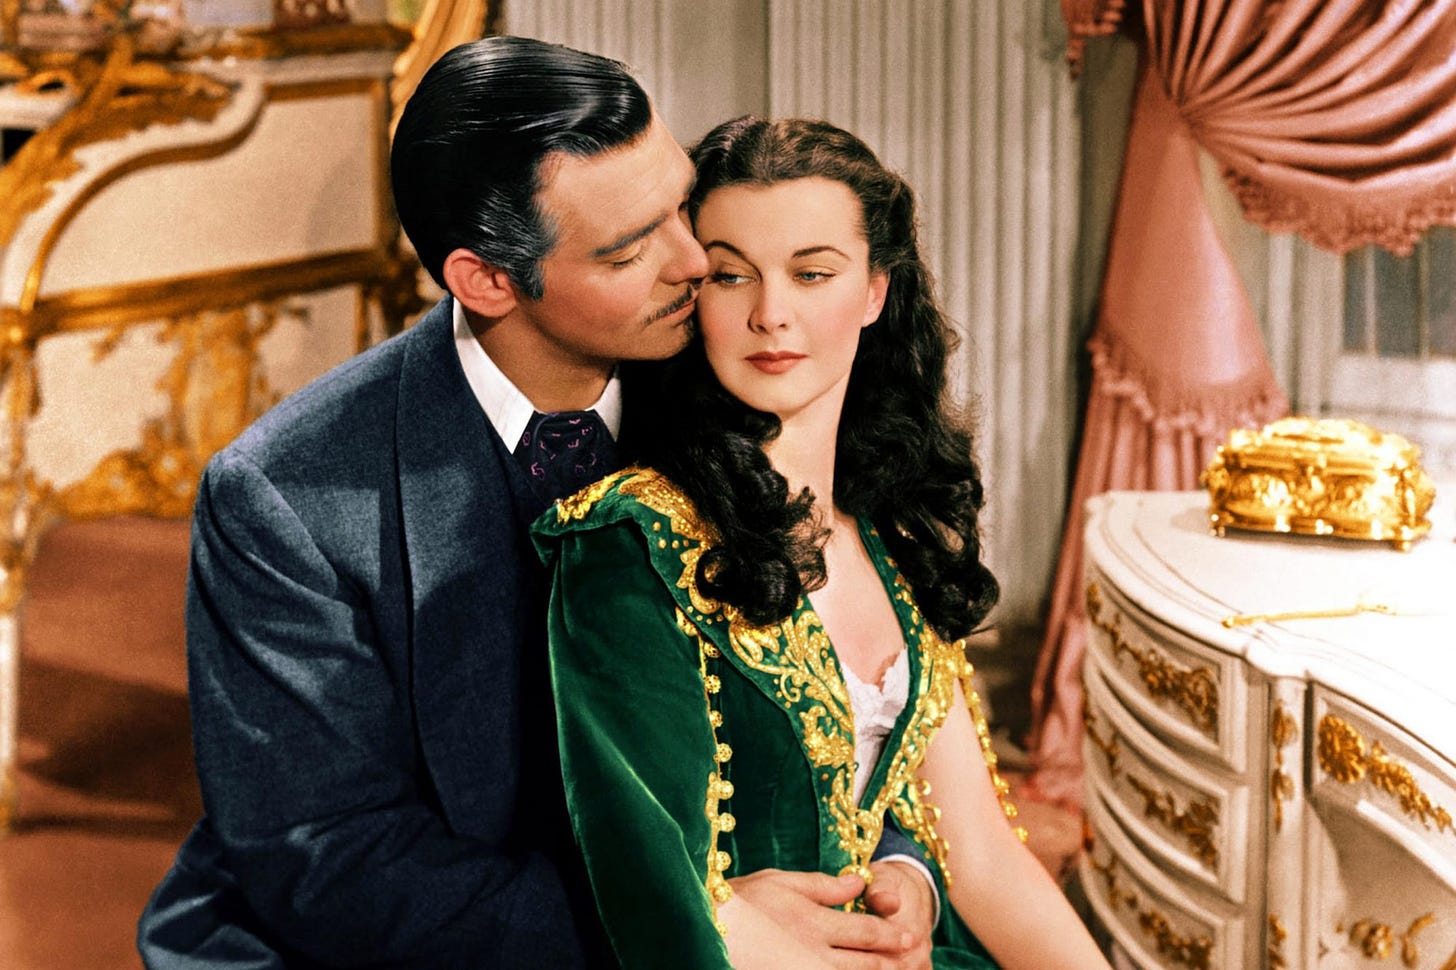 Gone With the Wind' returning to theaters for 80th anniversary | EW.com